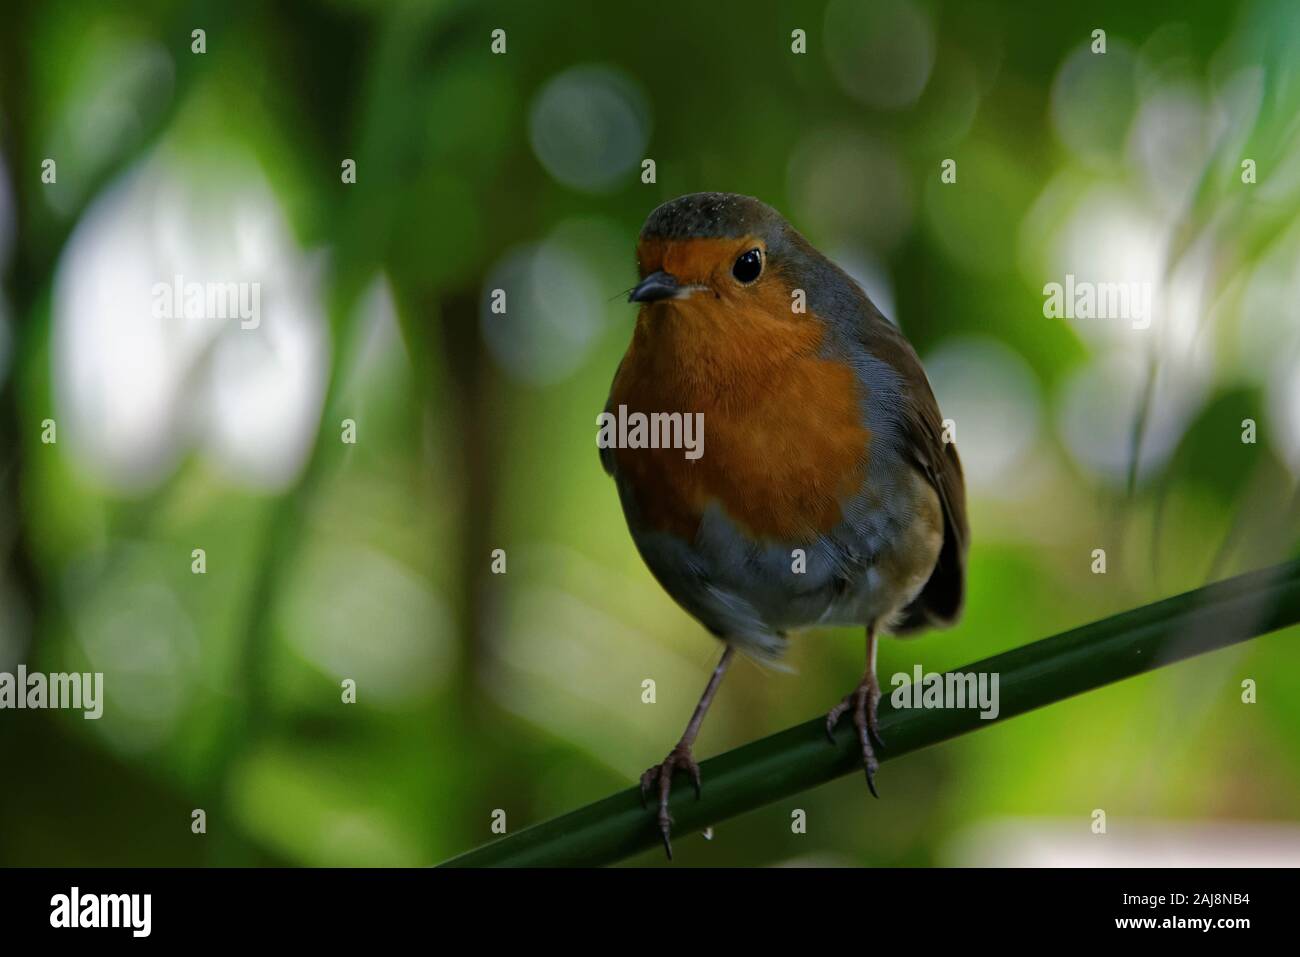 The European robin (Erithacus rubecula), known simply as the robin or robin redbreast in the British Isles, is a small insectivorous passerine bird. Stock Photo